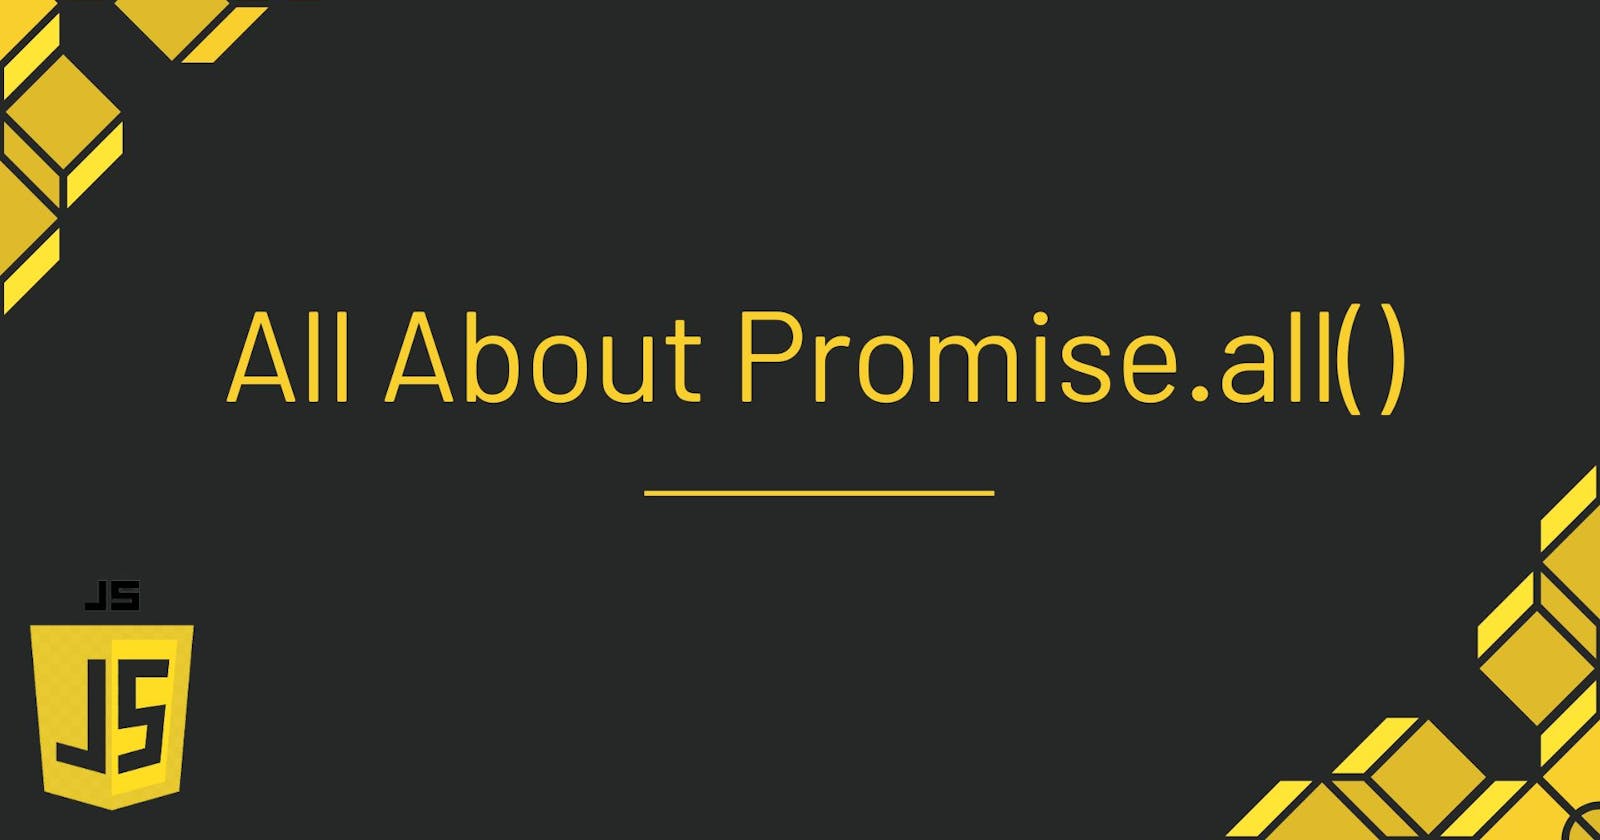 All About promise.all()